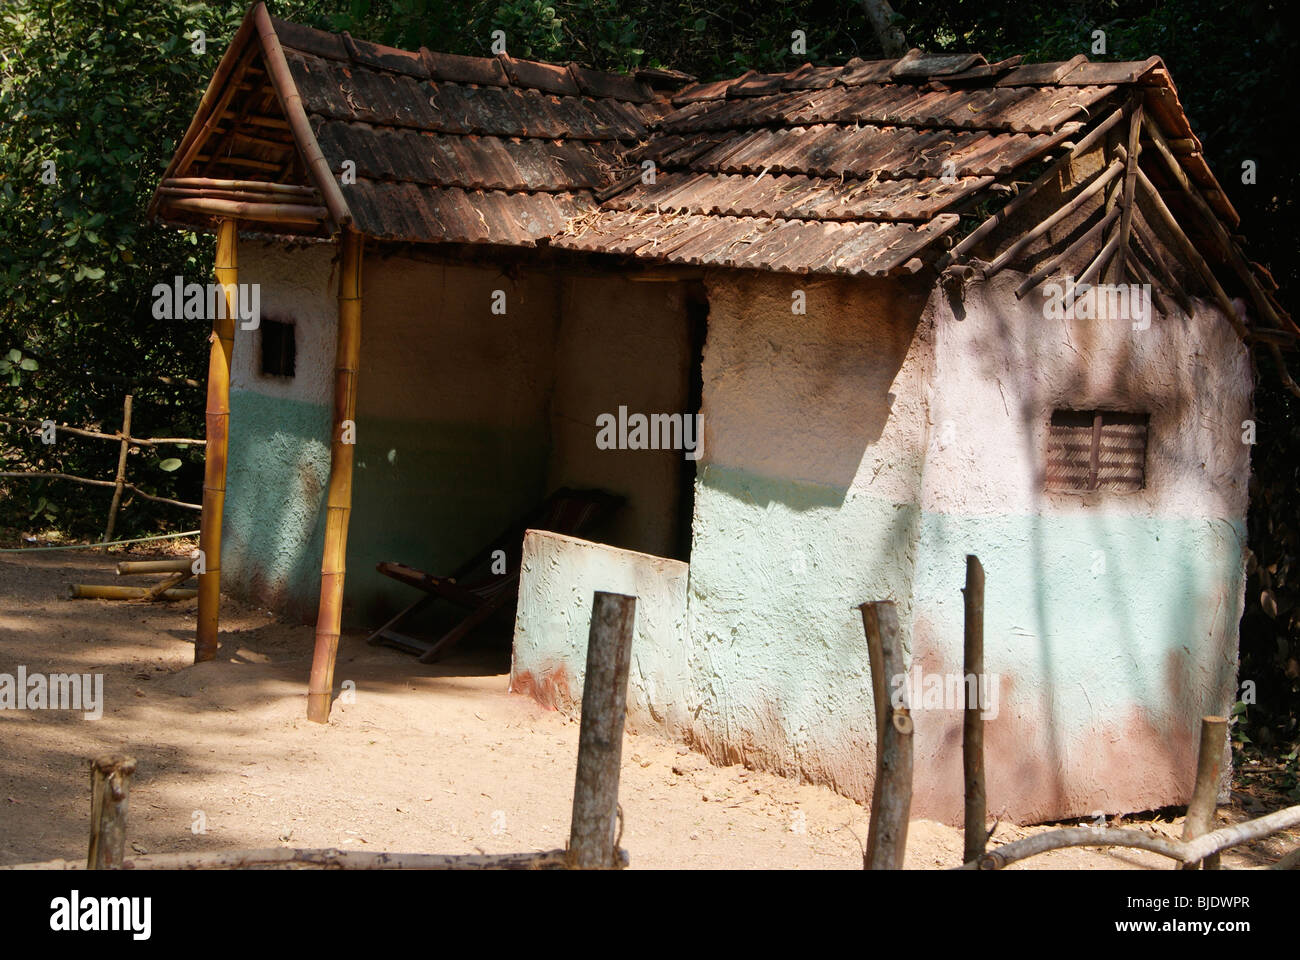 Poor Hut Home Built up of Clay,bamboo and Roofs with Natural Clay Tiles.scene from Kerala India Stock Photo